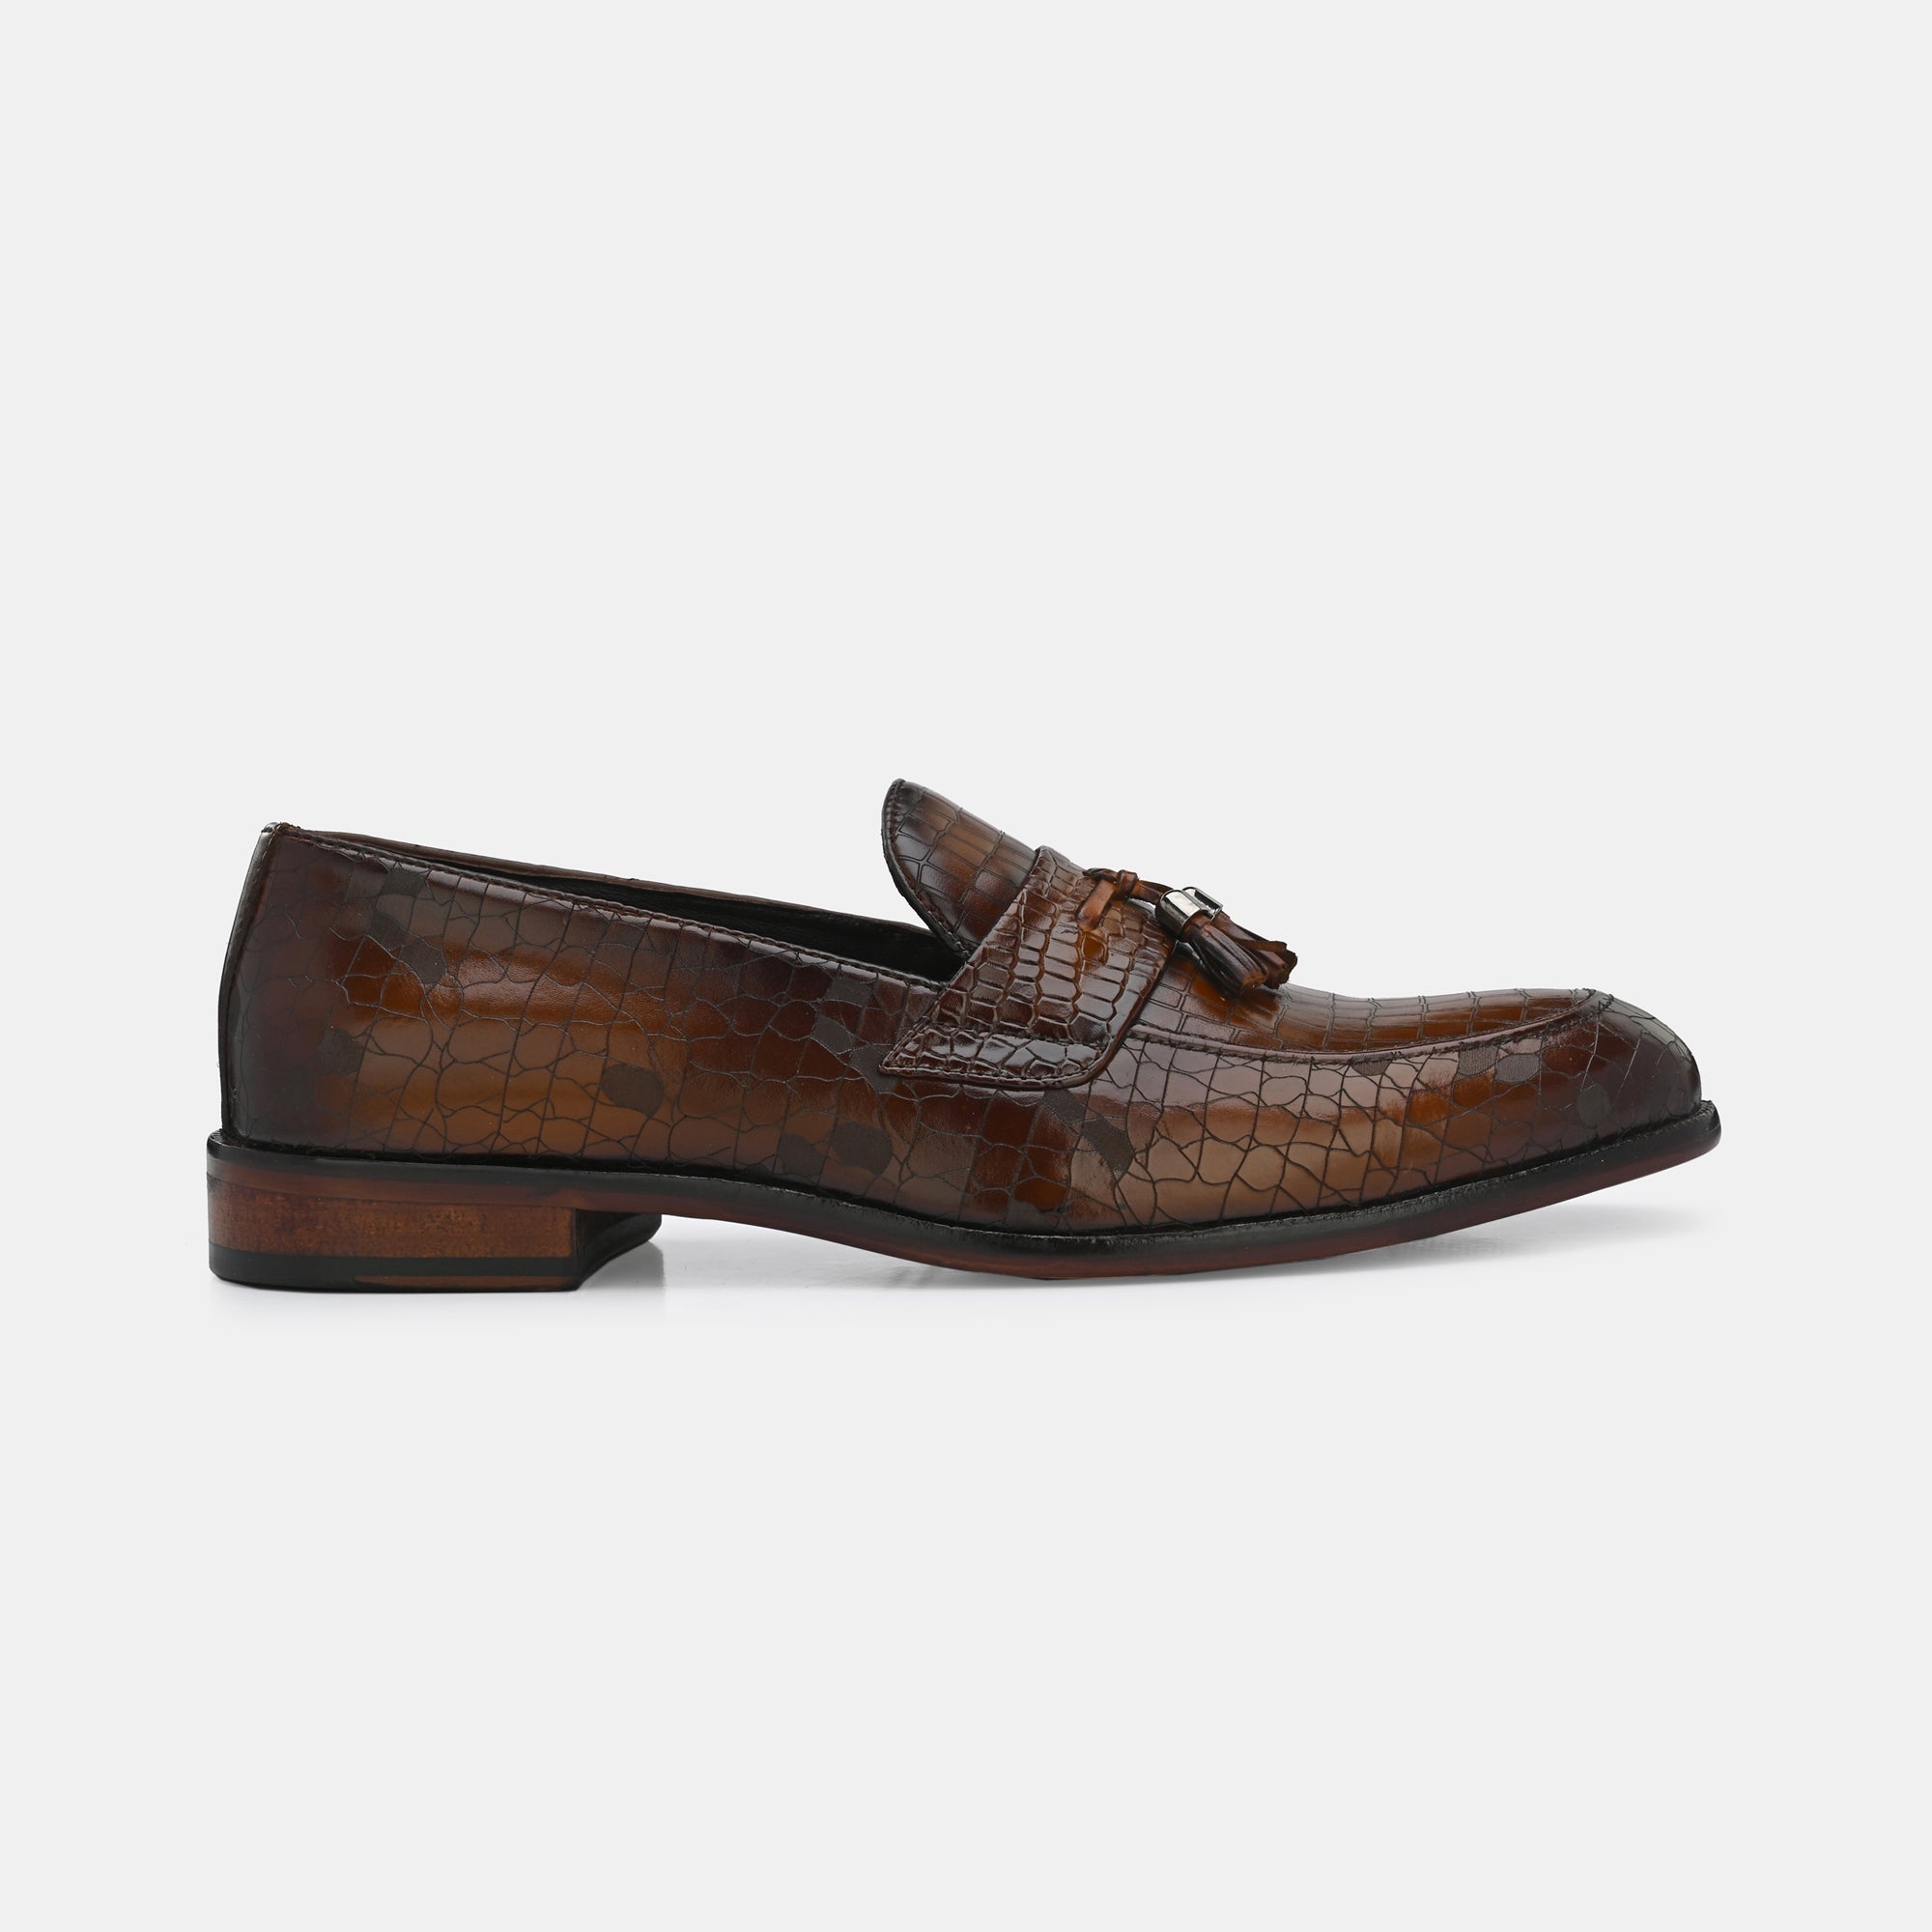 Tan Laser Engraved Tassel Loafers by Lafattio